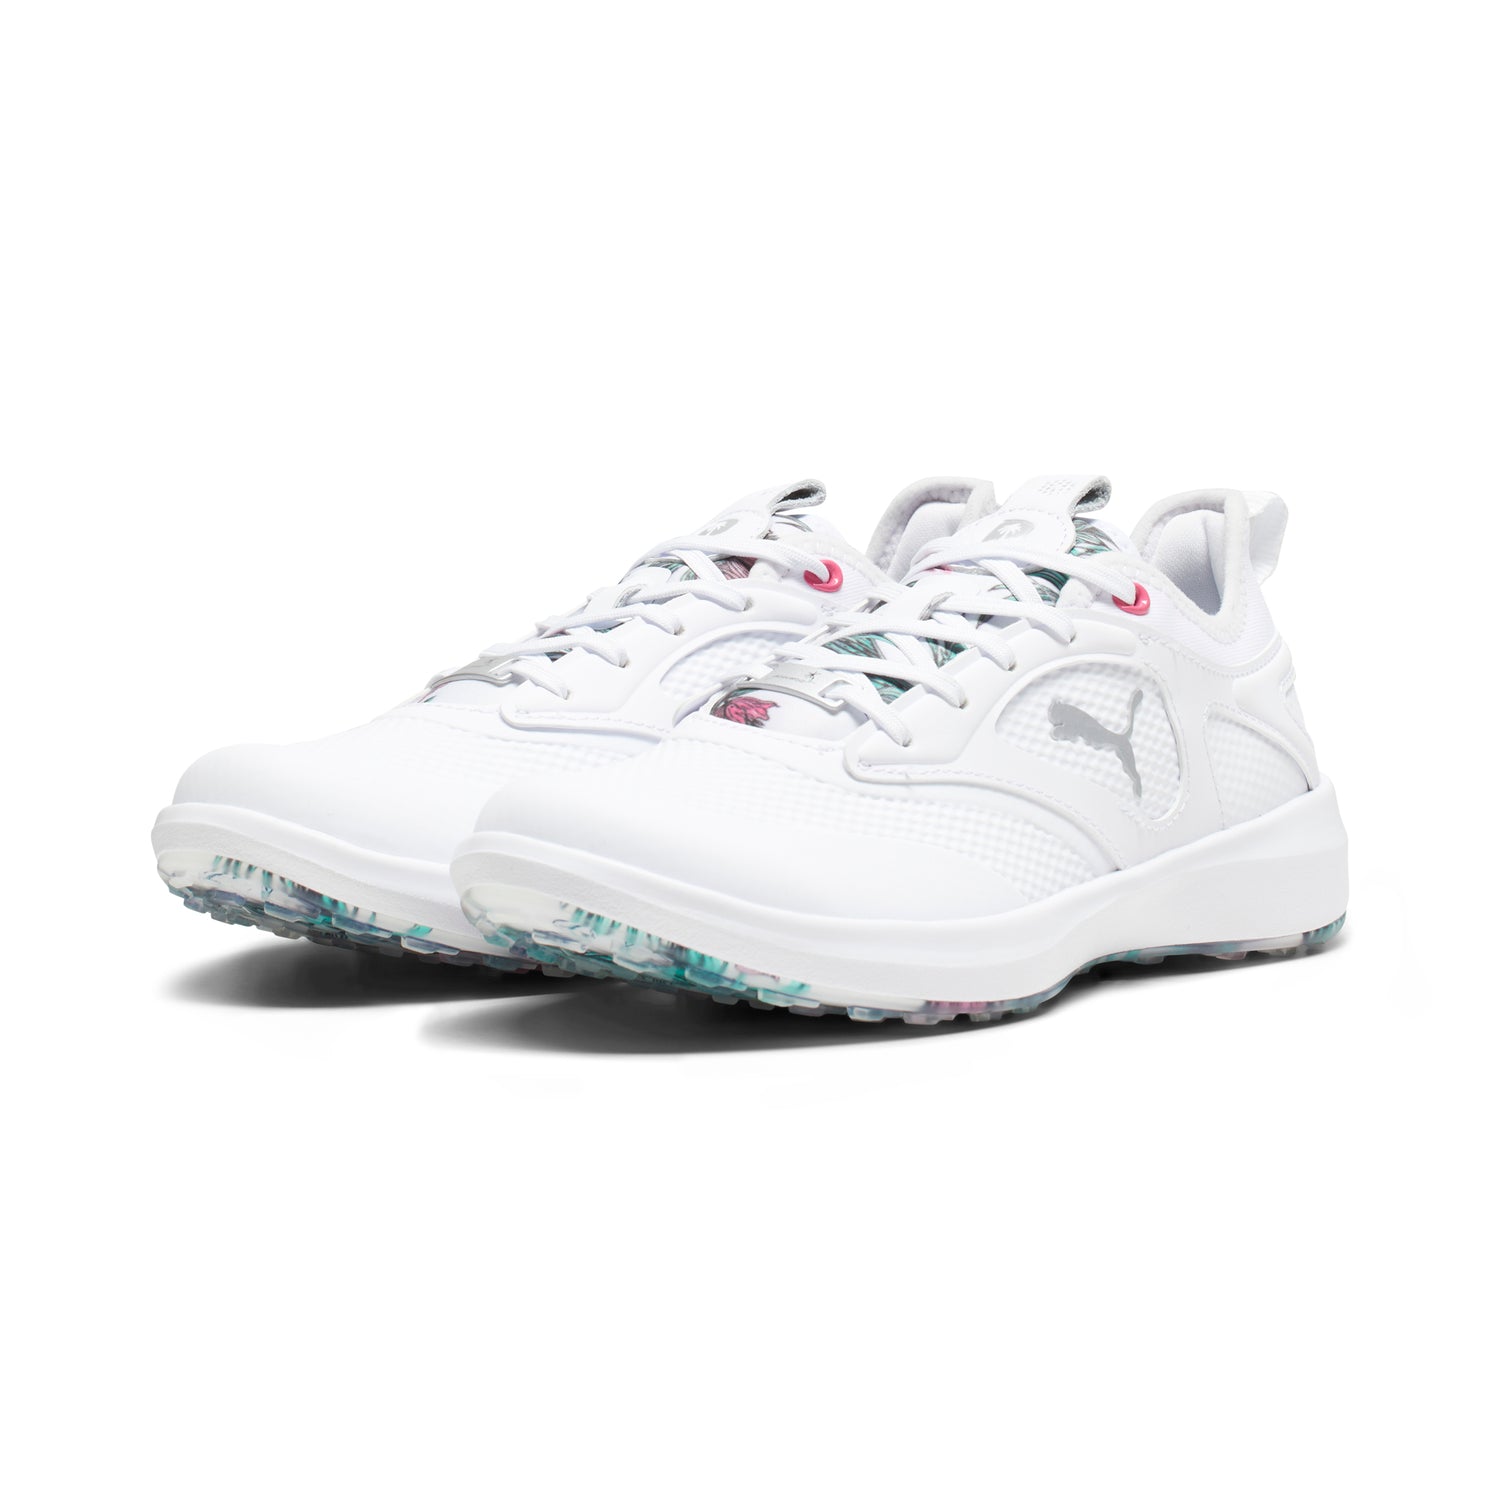 Buy White Sneakers for Girls by PUMA Online | Ajio.com